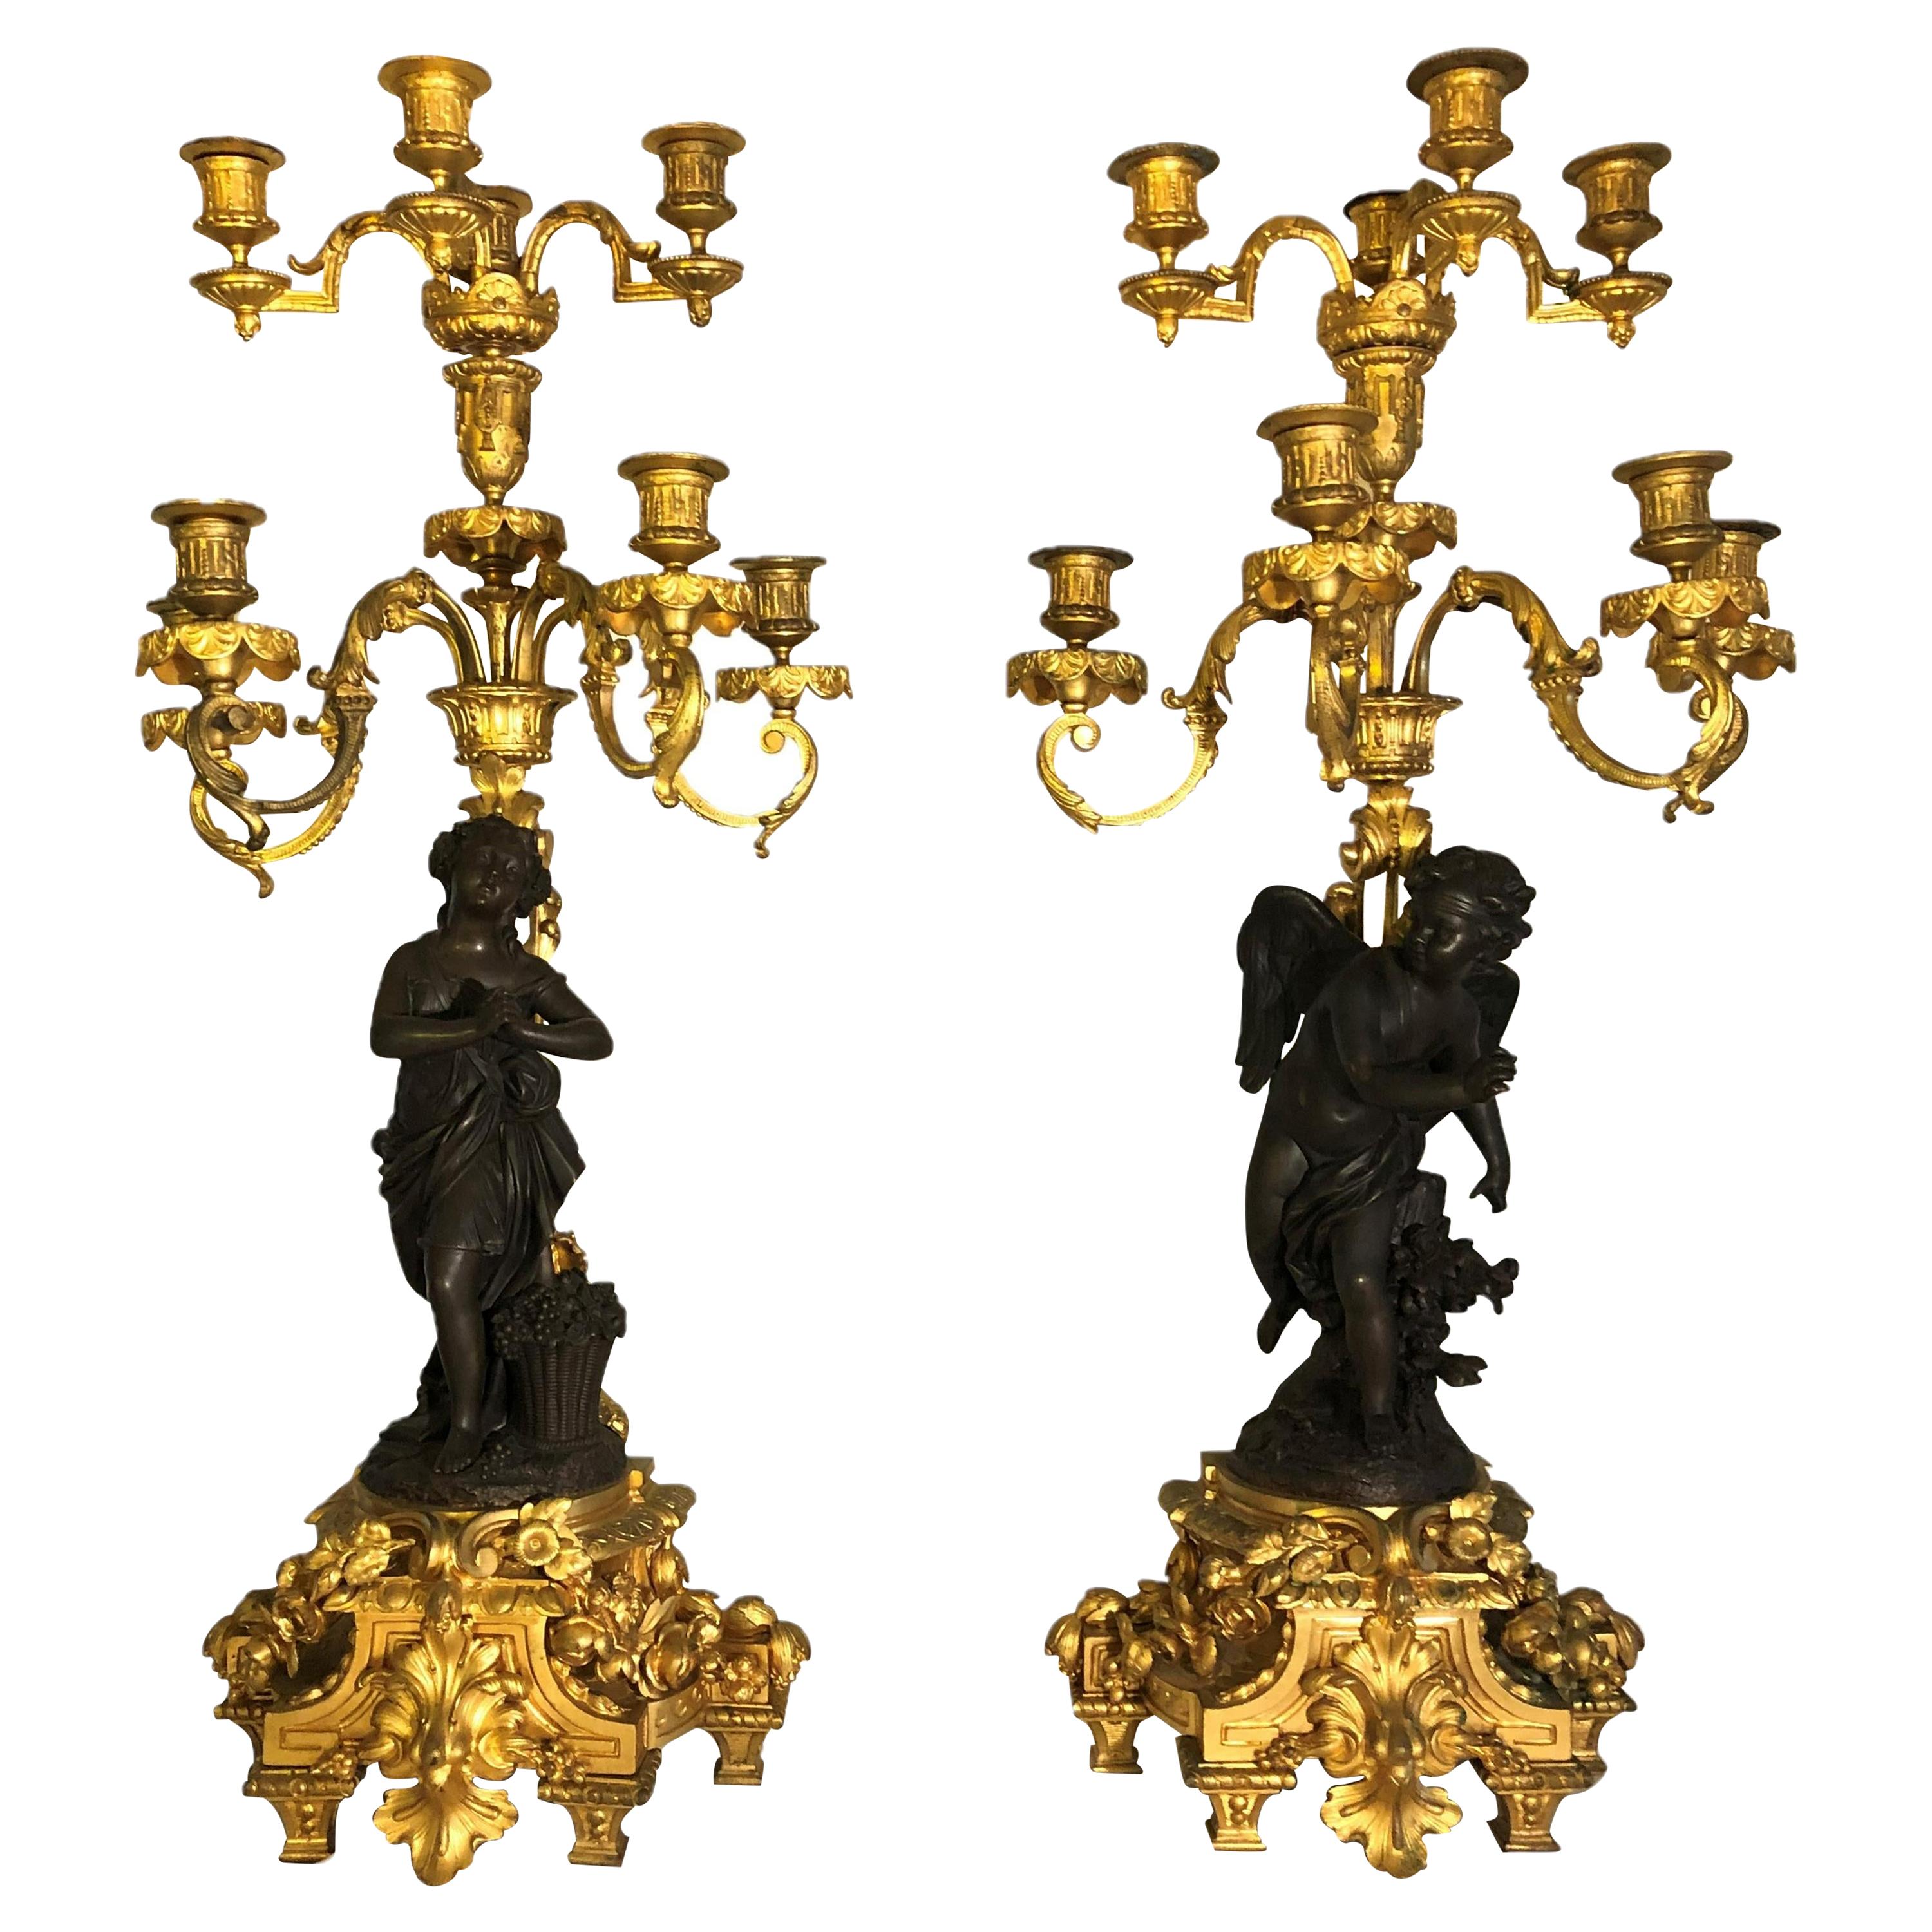 Beautiful Pair of 19th Century French Gilt Bronze and Patinted Candelabra's For Sale